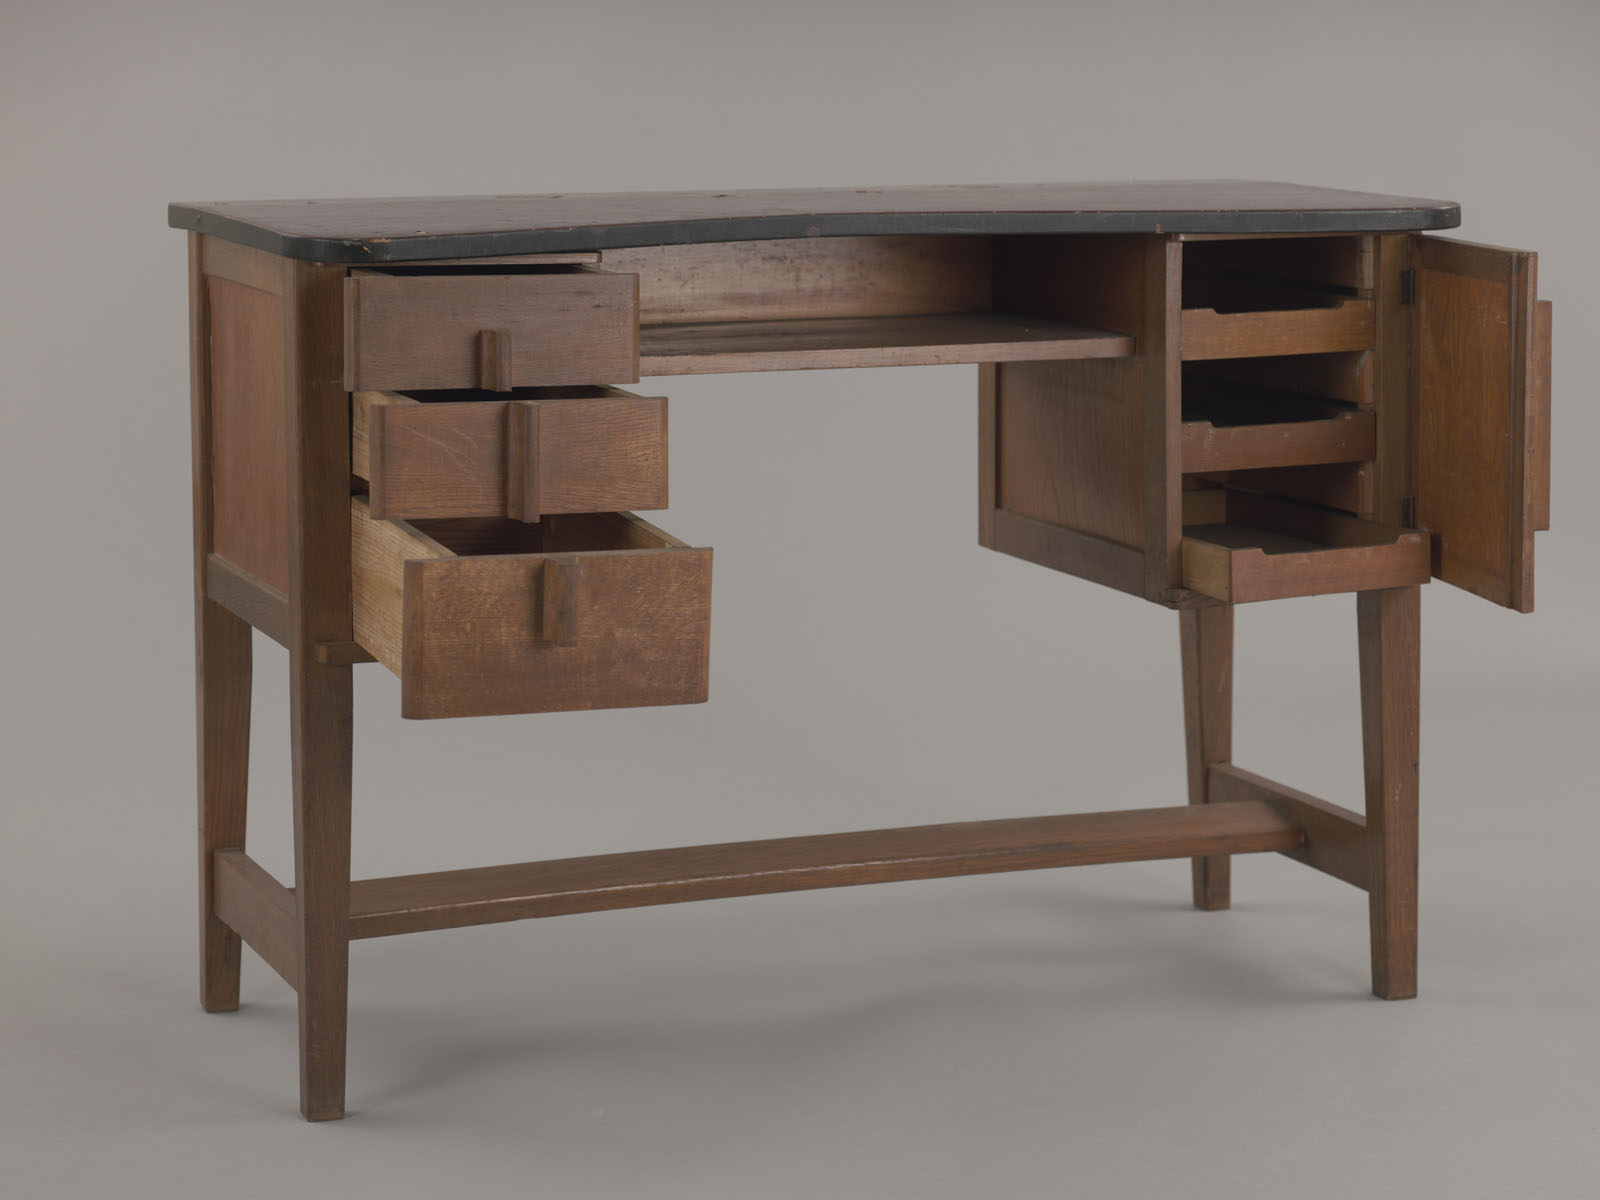 Desk regularly used by Ofuji (drawers)